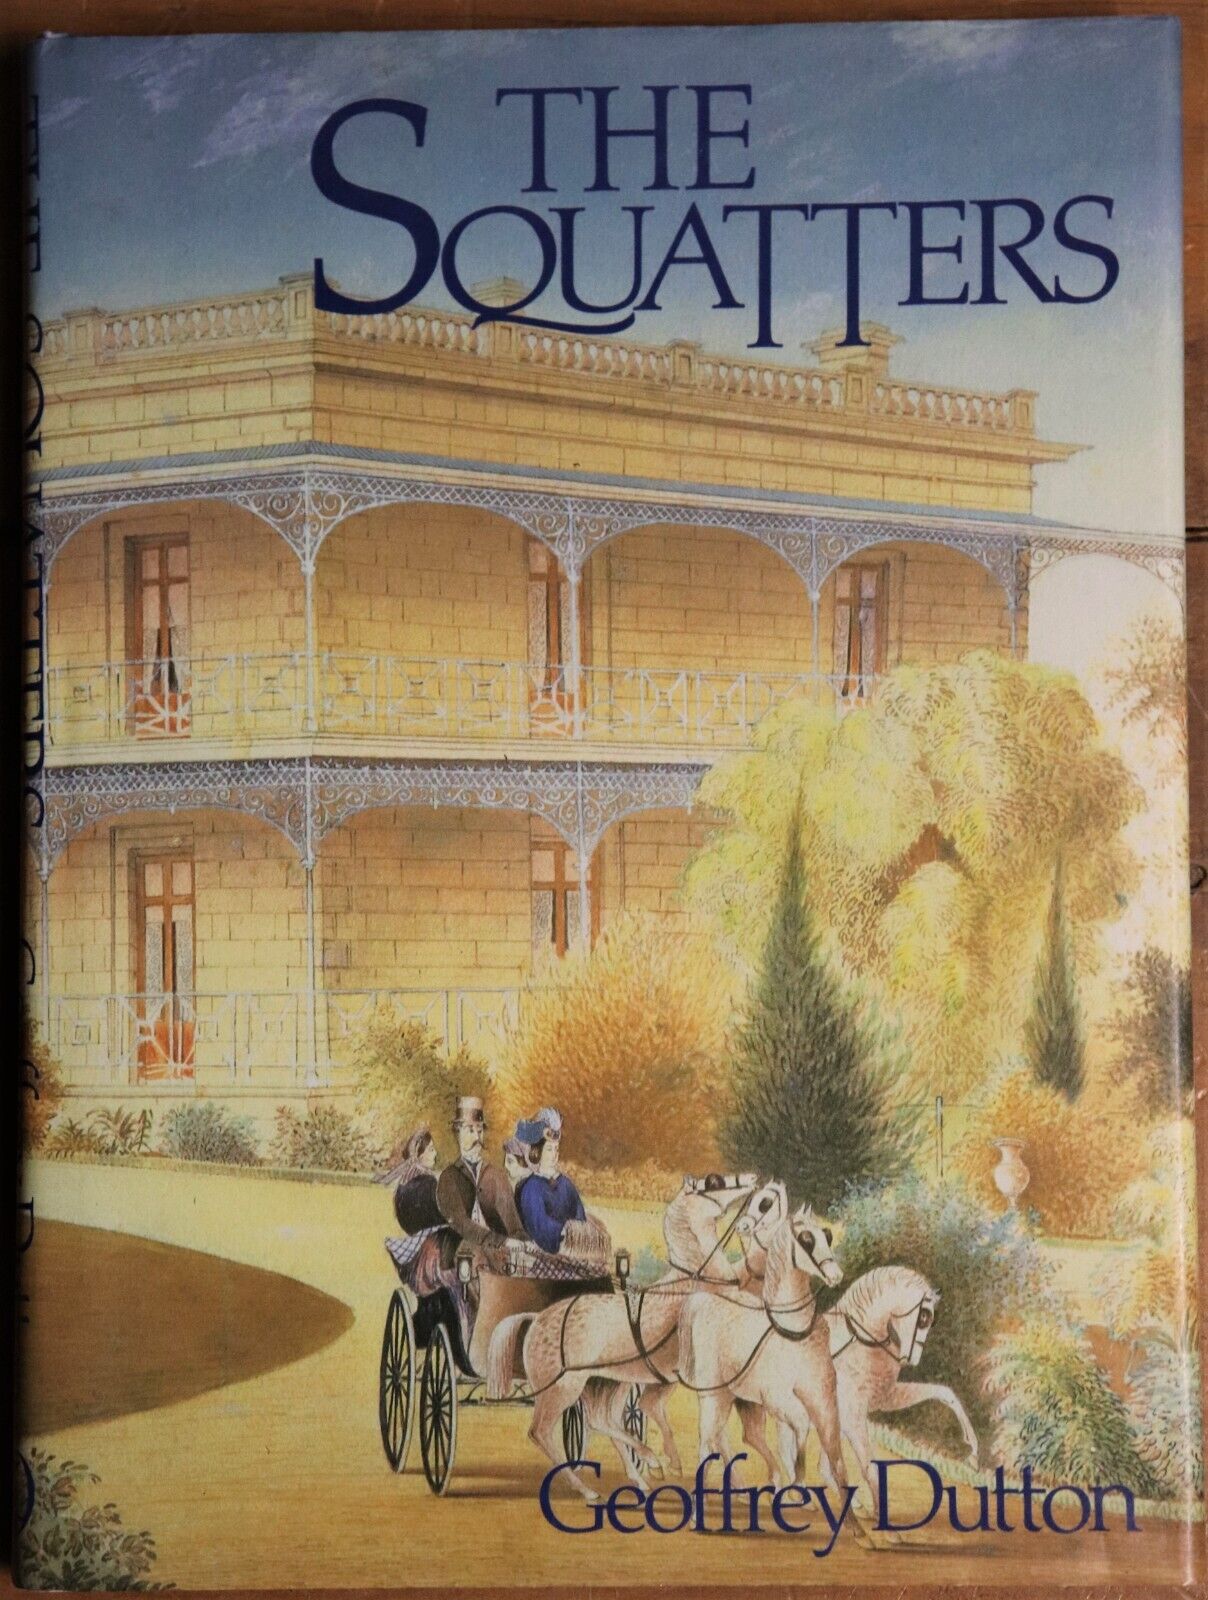 The Squatters by Geoffrey Dutton - 1985 - Australian History Book